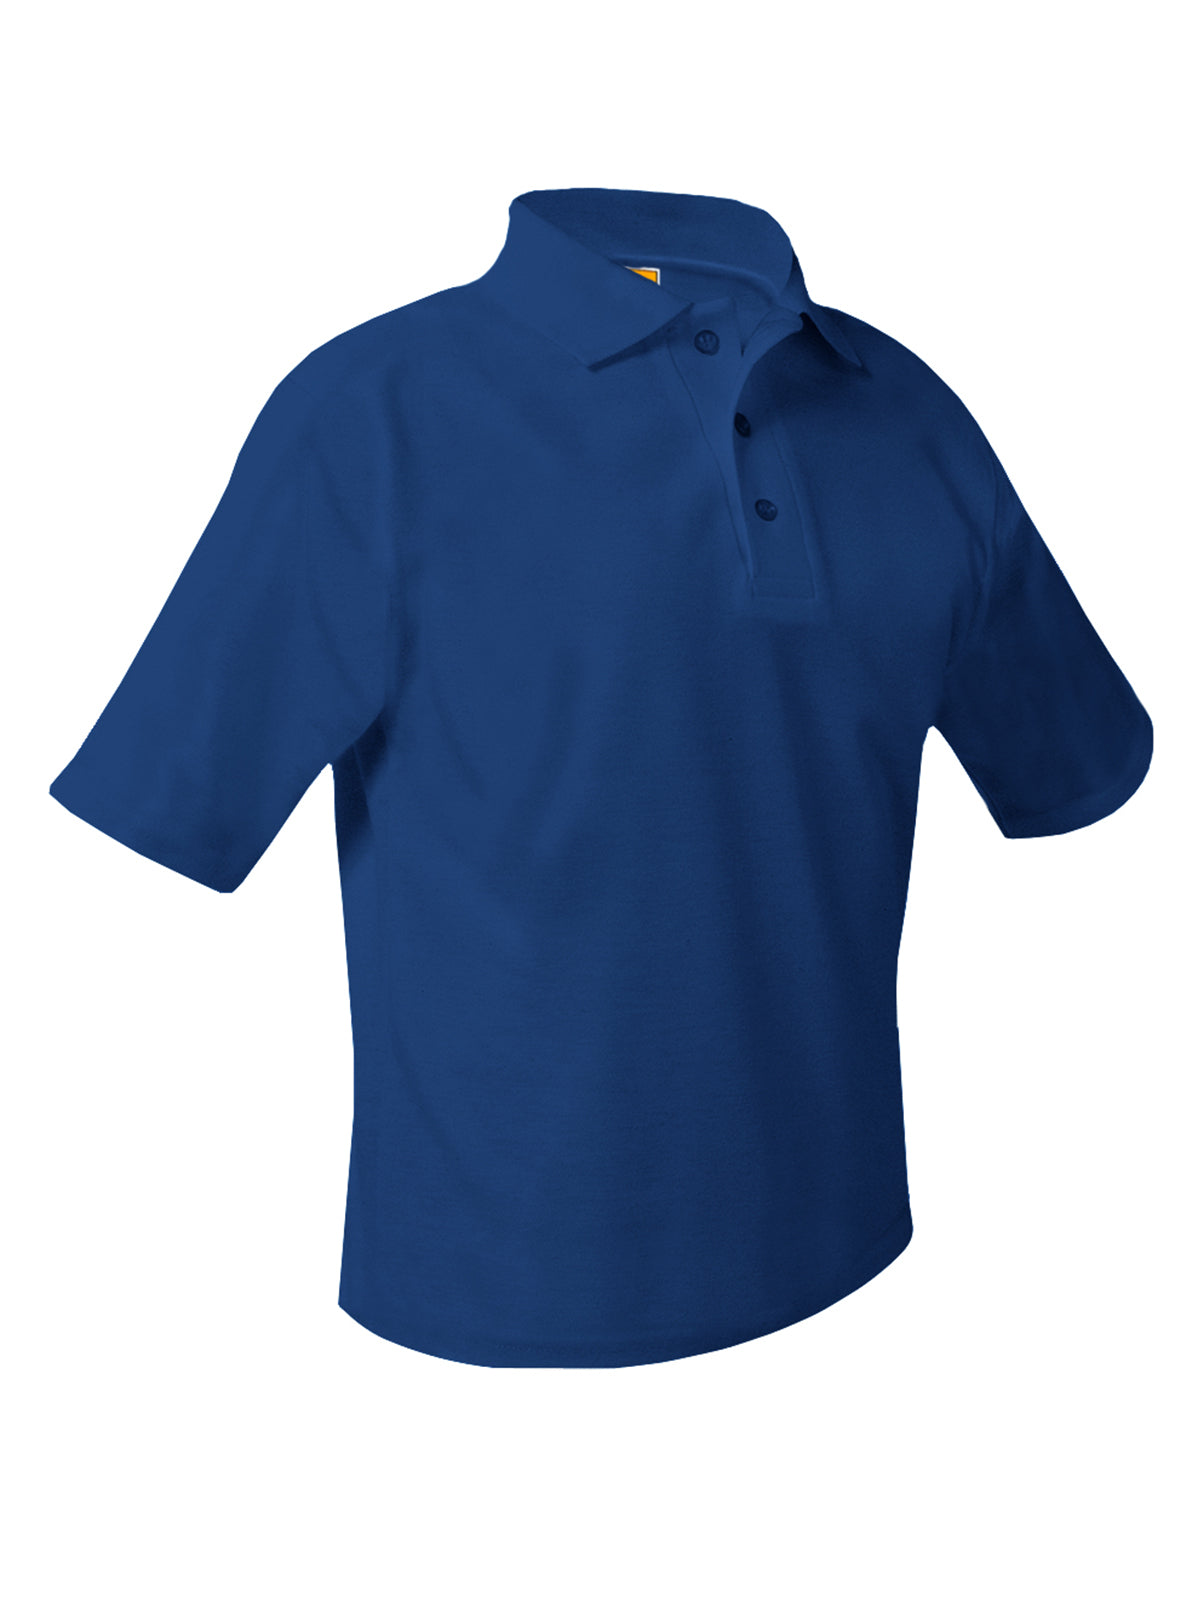 Unisex Adults and Kids Polo - 8760 - Navy